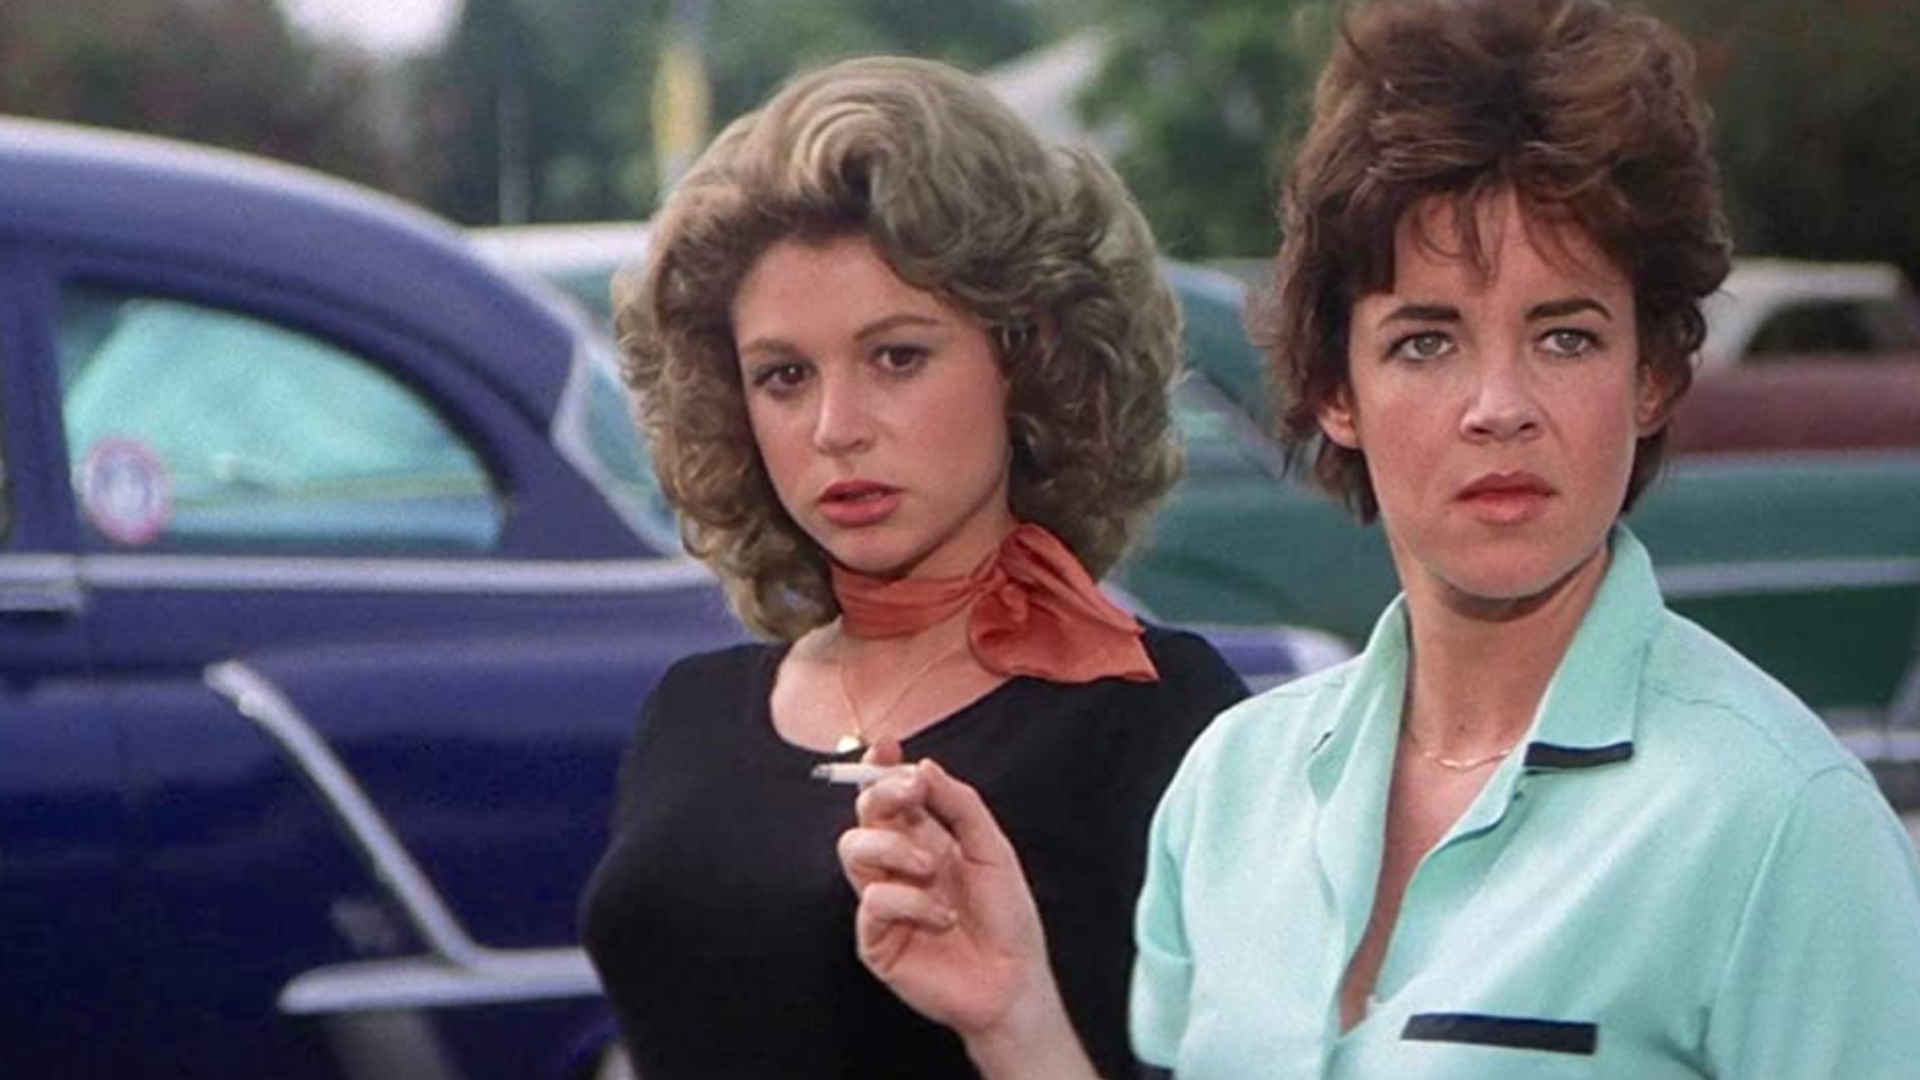 Grease prequel series is coming to Paramount Plus | GamesRadar+